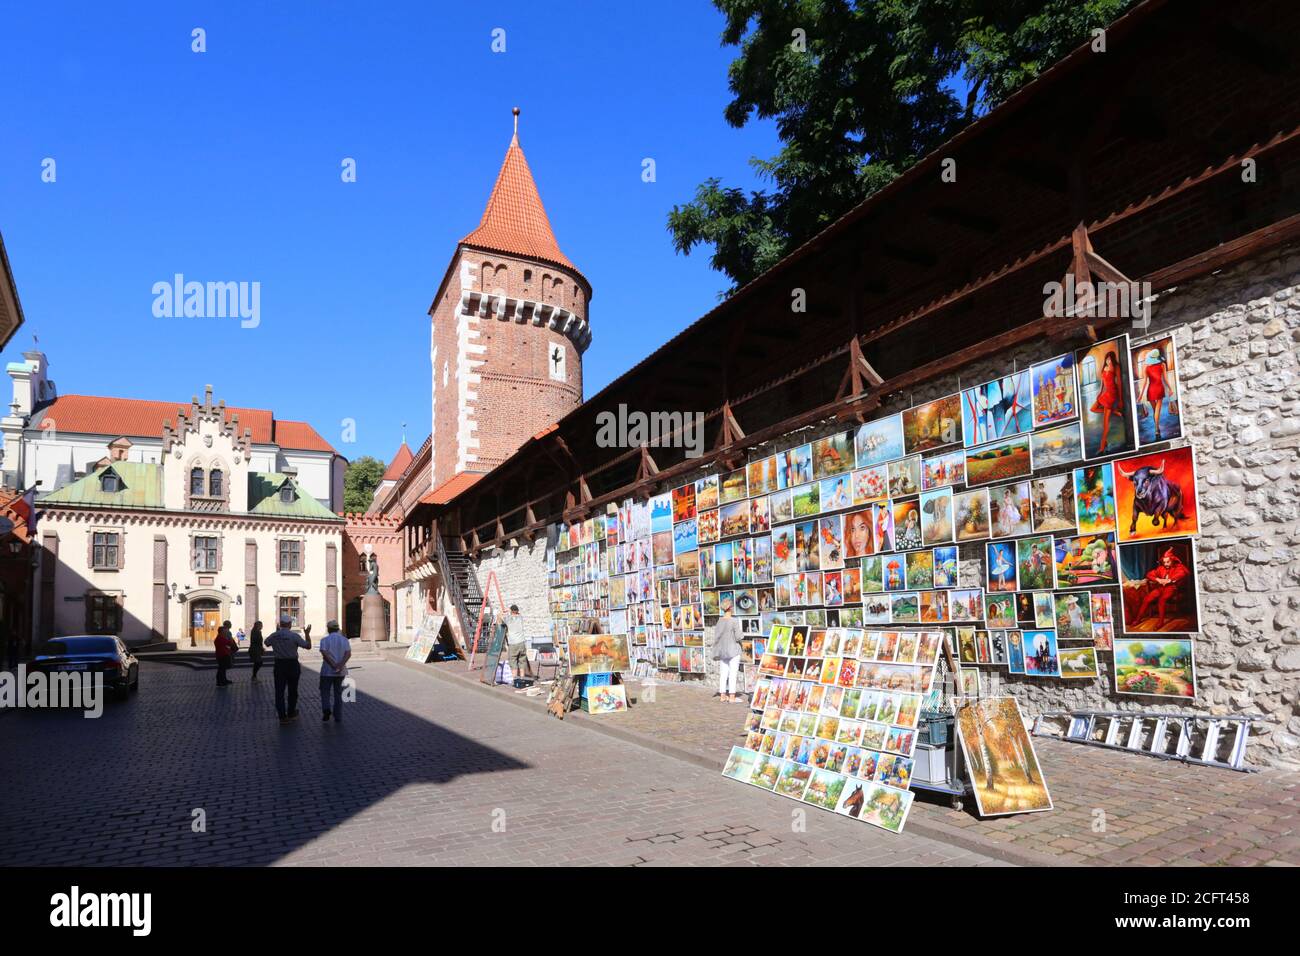 Cracow. Krakow. Poland.The part of medieval city walls. The open air art gallery selling paintings. The Carpenters Tower (Baszta Stolarzy) and Little Stock Photo